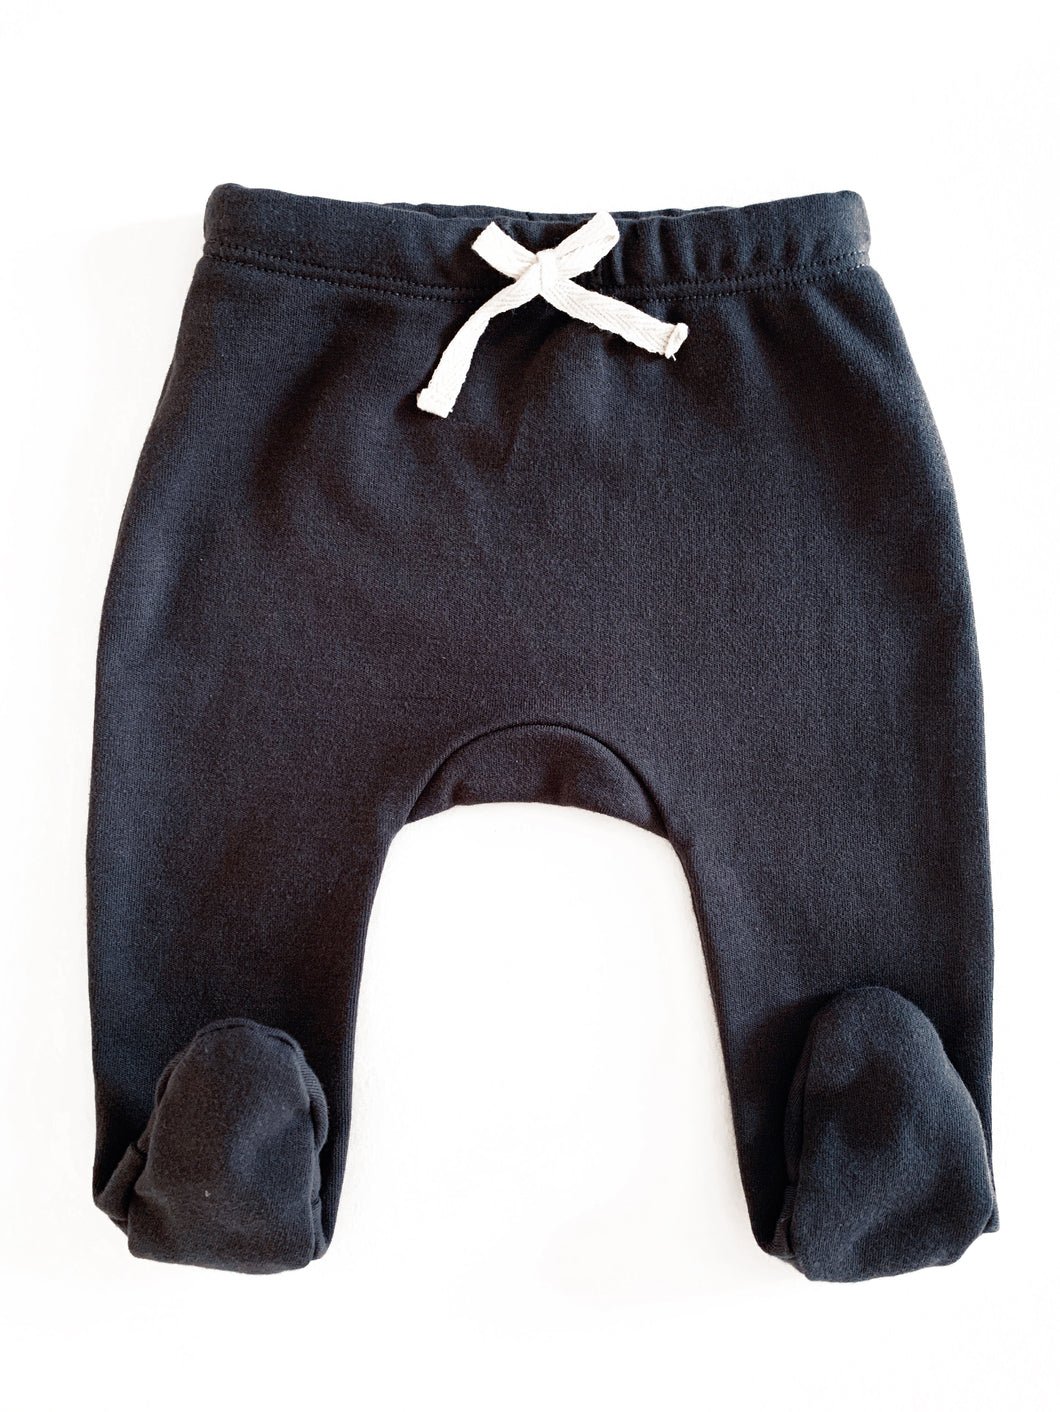 Organic Cotton Footed Pants in Charcoal - CovetedThings